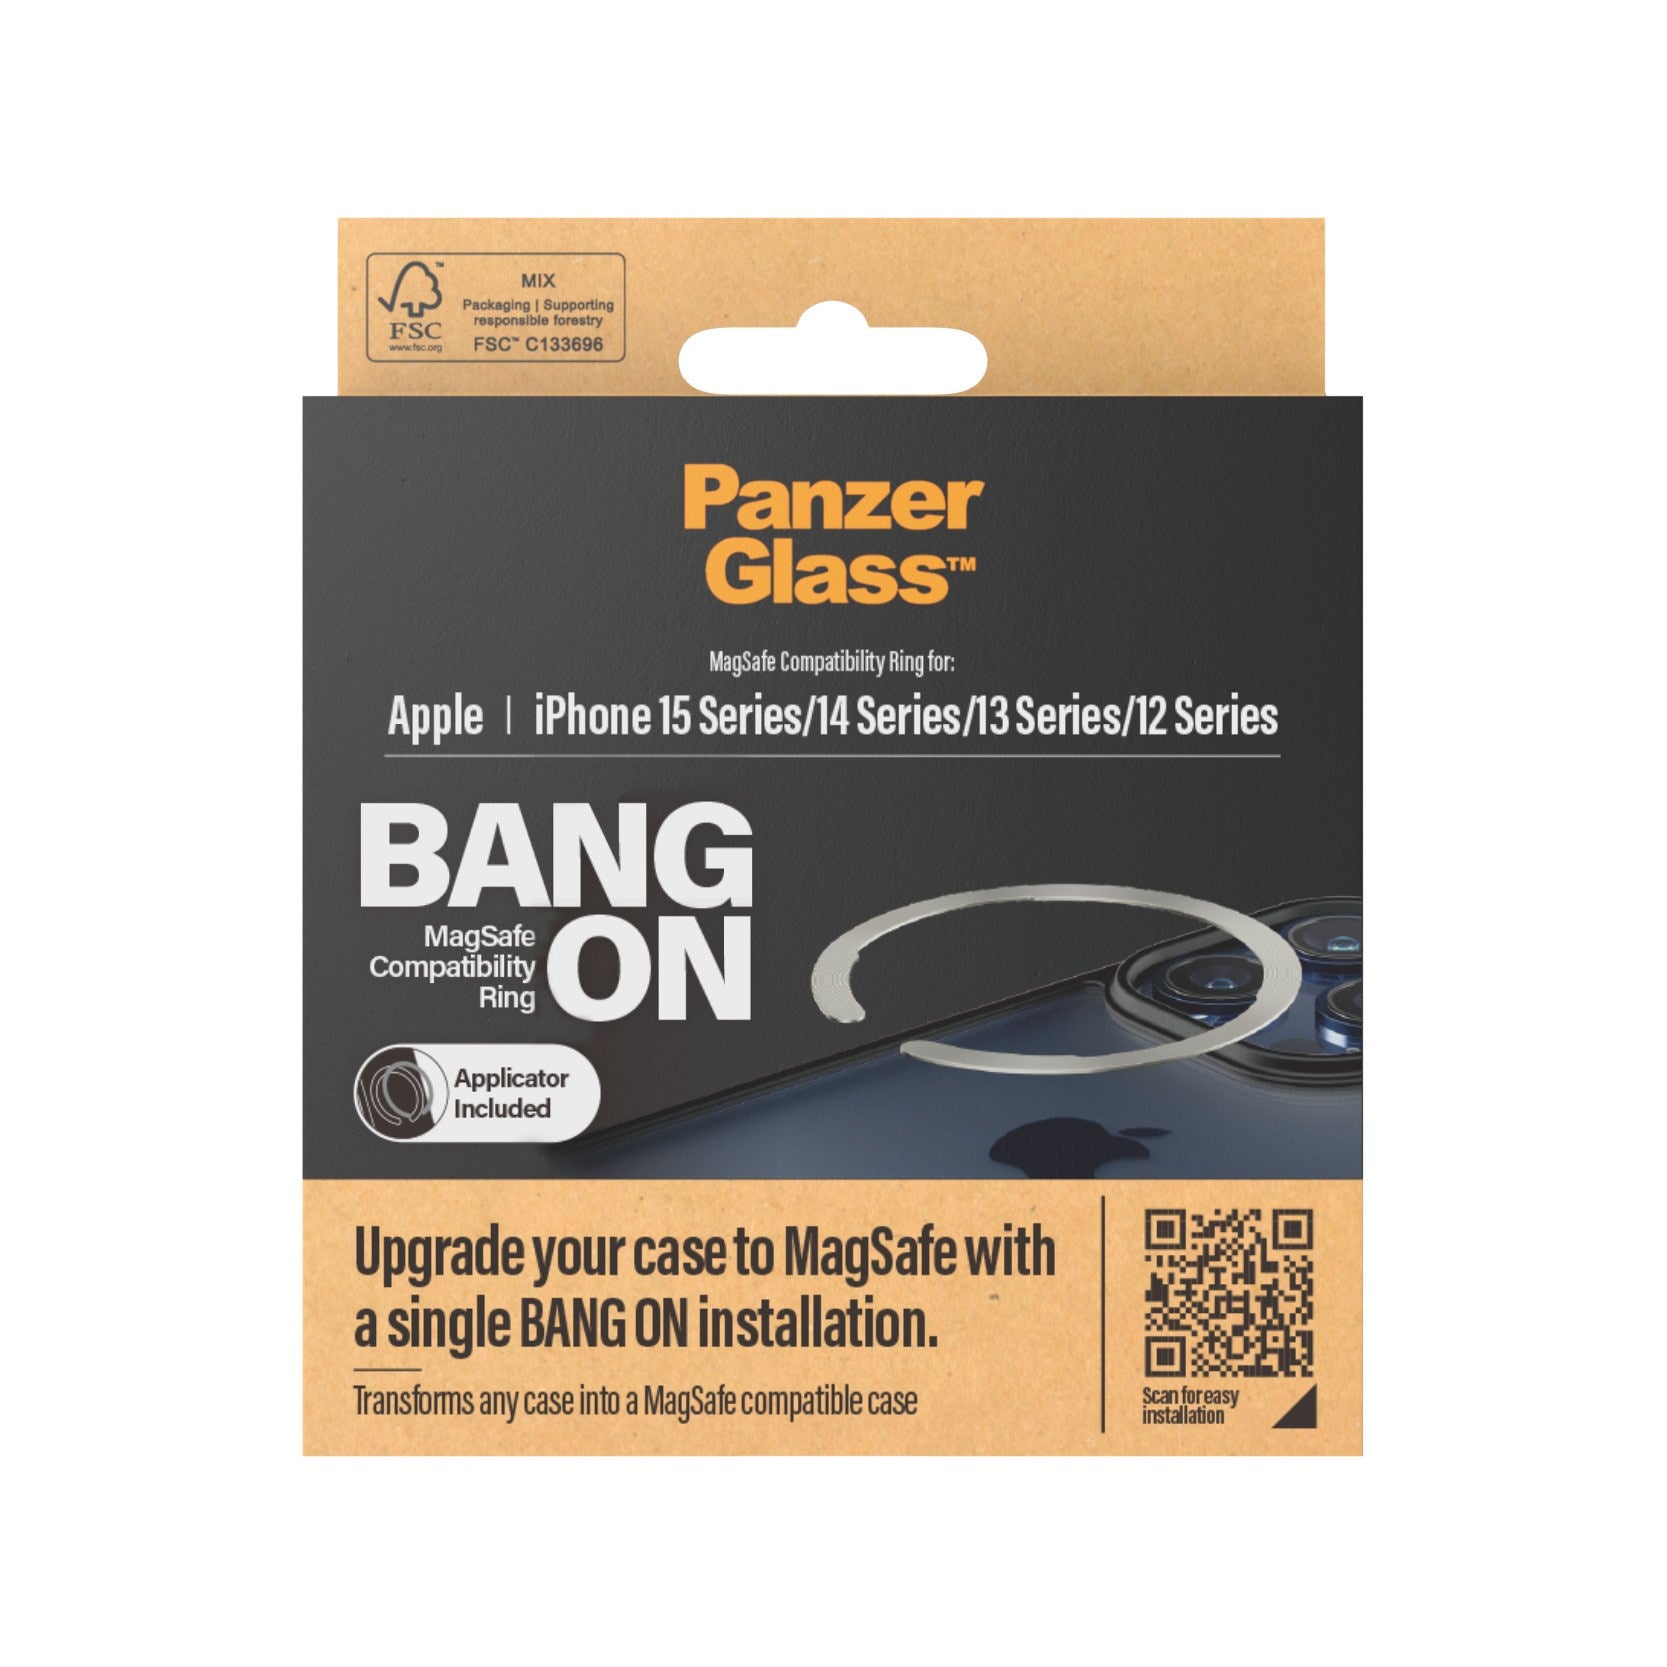 PanzerGlass™ BANG ON MagSafe compatibility ring til iPhone 15/14/13/12